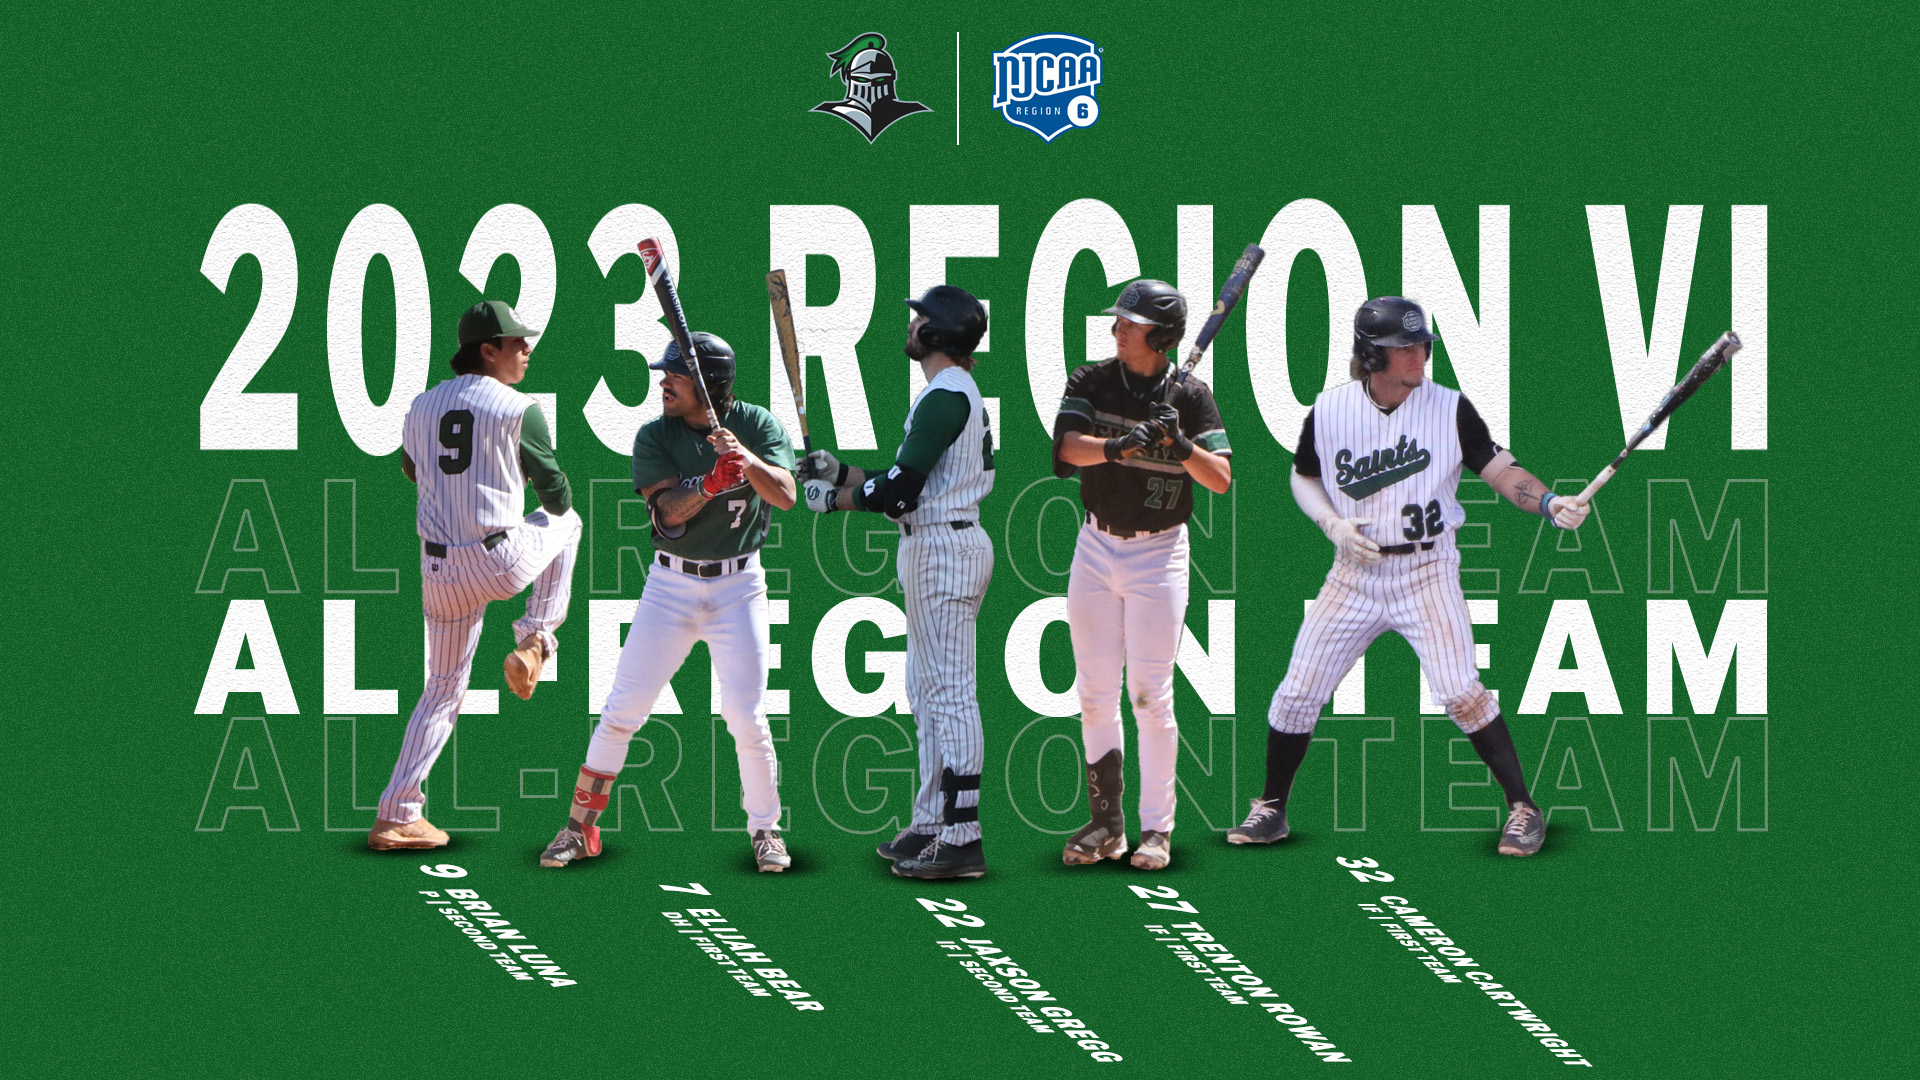 Saints atop the region with 5 All-Region selections